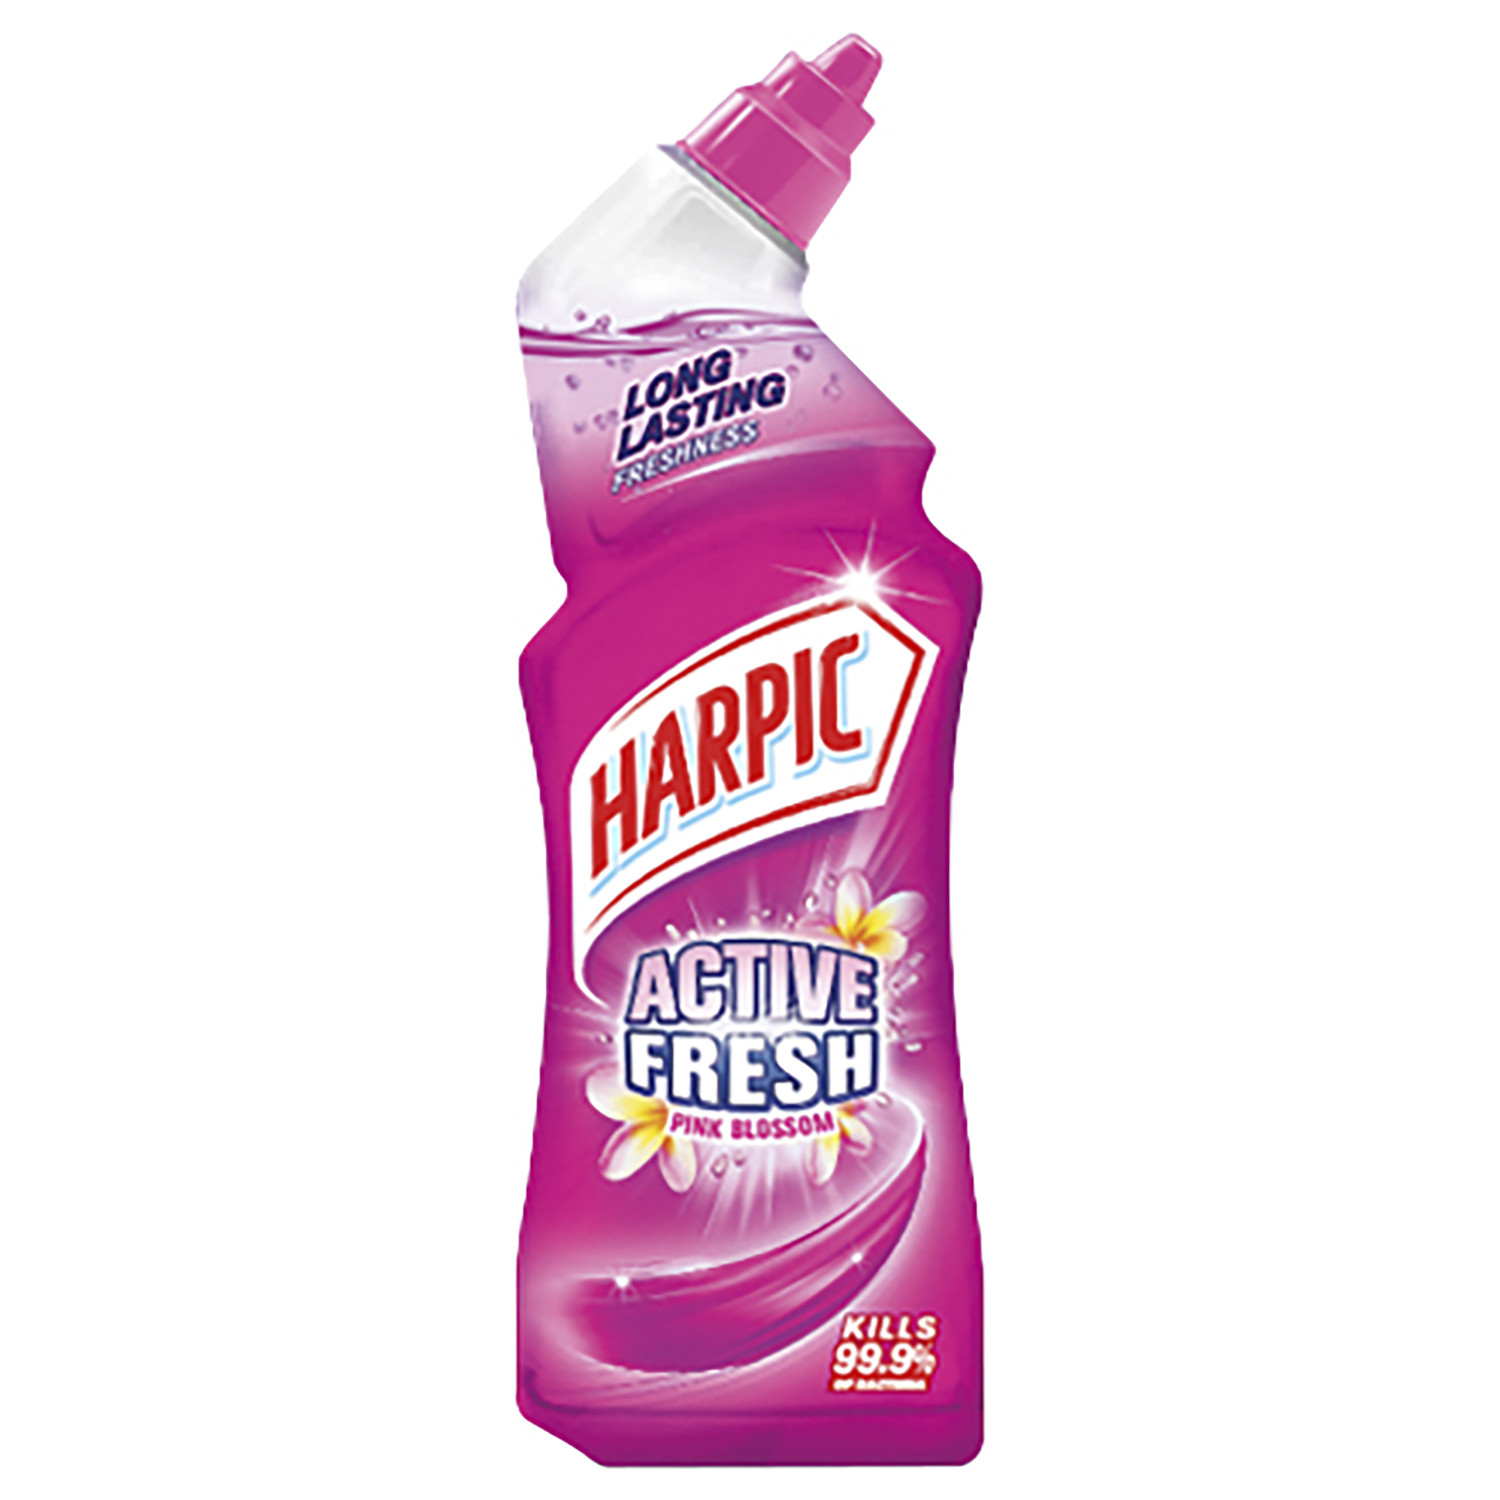 Harpic Active Fresh Cleaning Gel 750ml - Pink Blossom Image